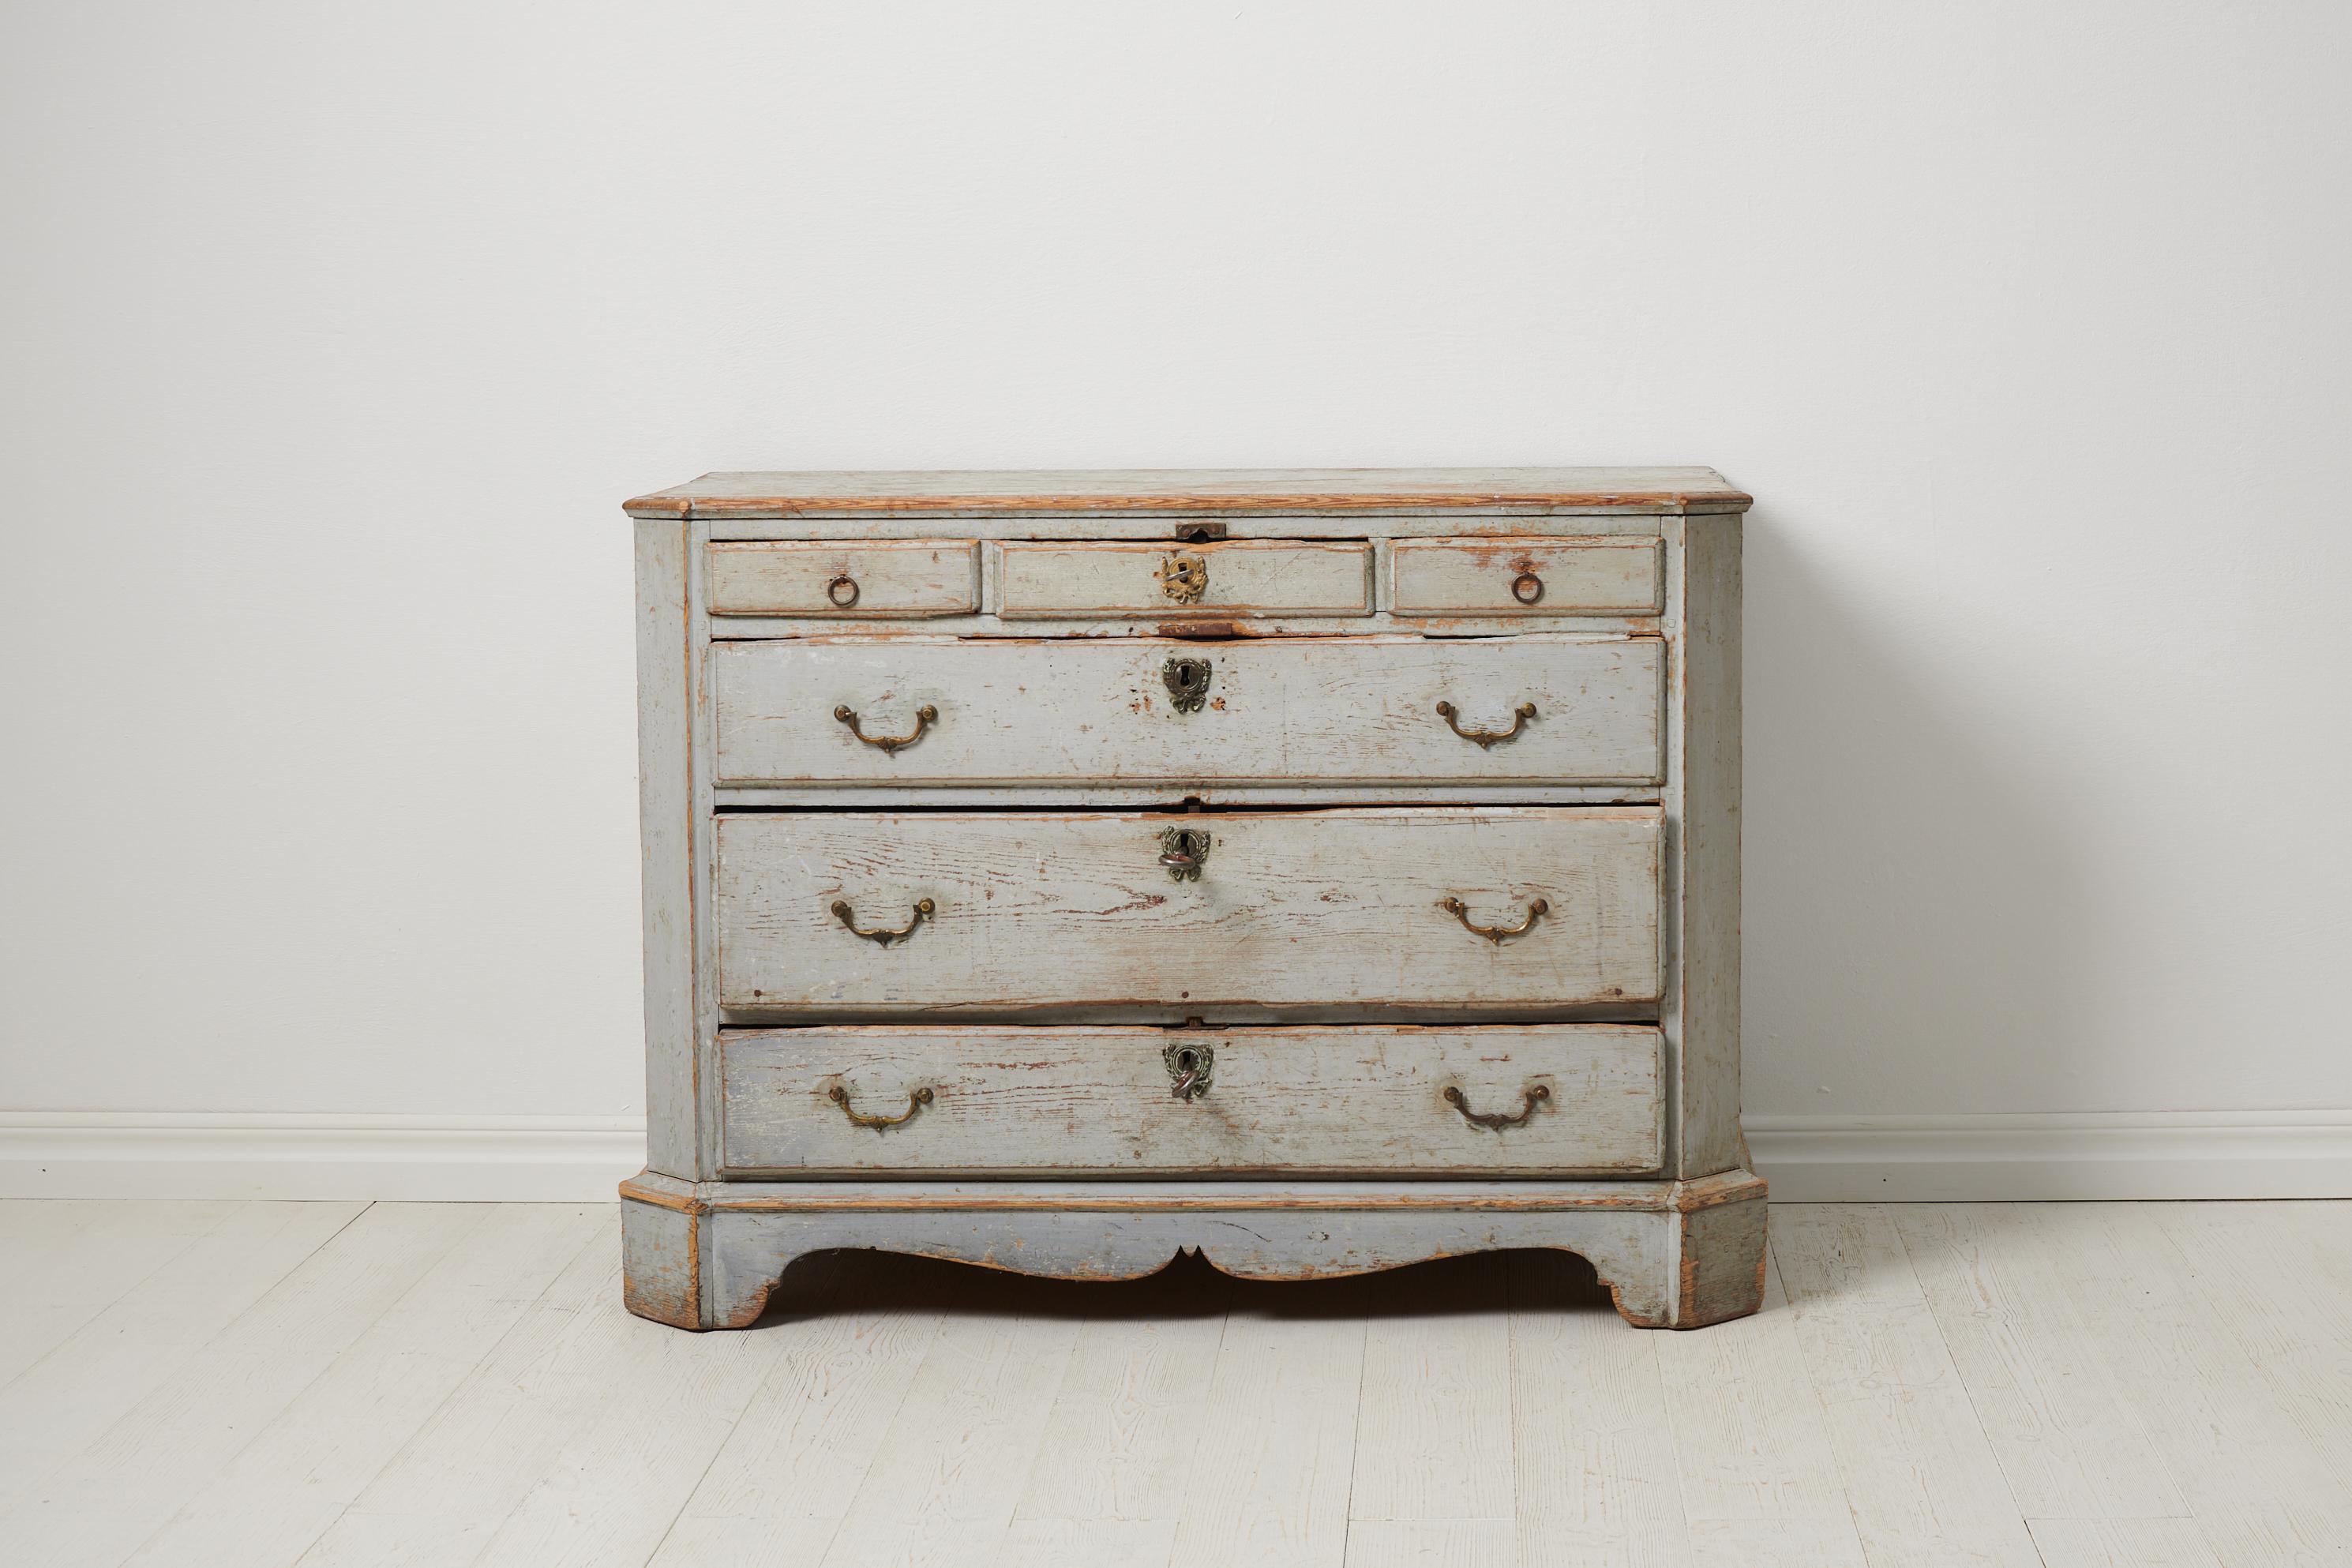 Antique chest of drawers or commode from northern Sweden made in a classic straight gustavian shape from the late 1700s. The chest is a genuine Swedish antique made by hand in pine and is in untouched original condition . The chest has 6 drawers and